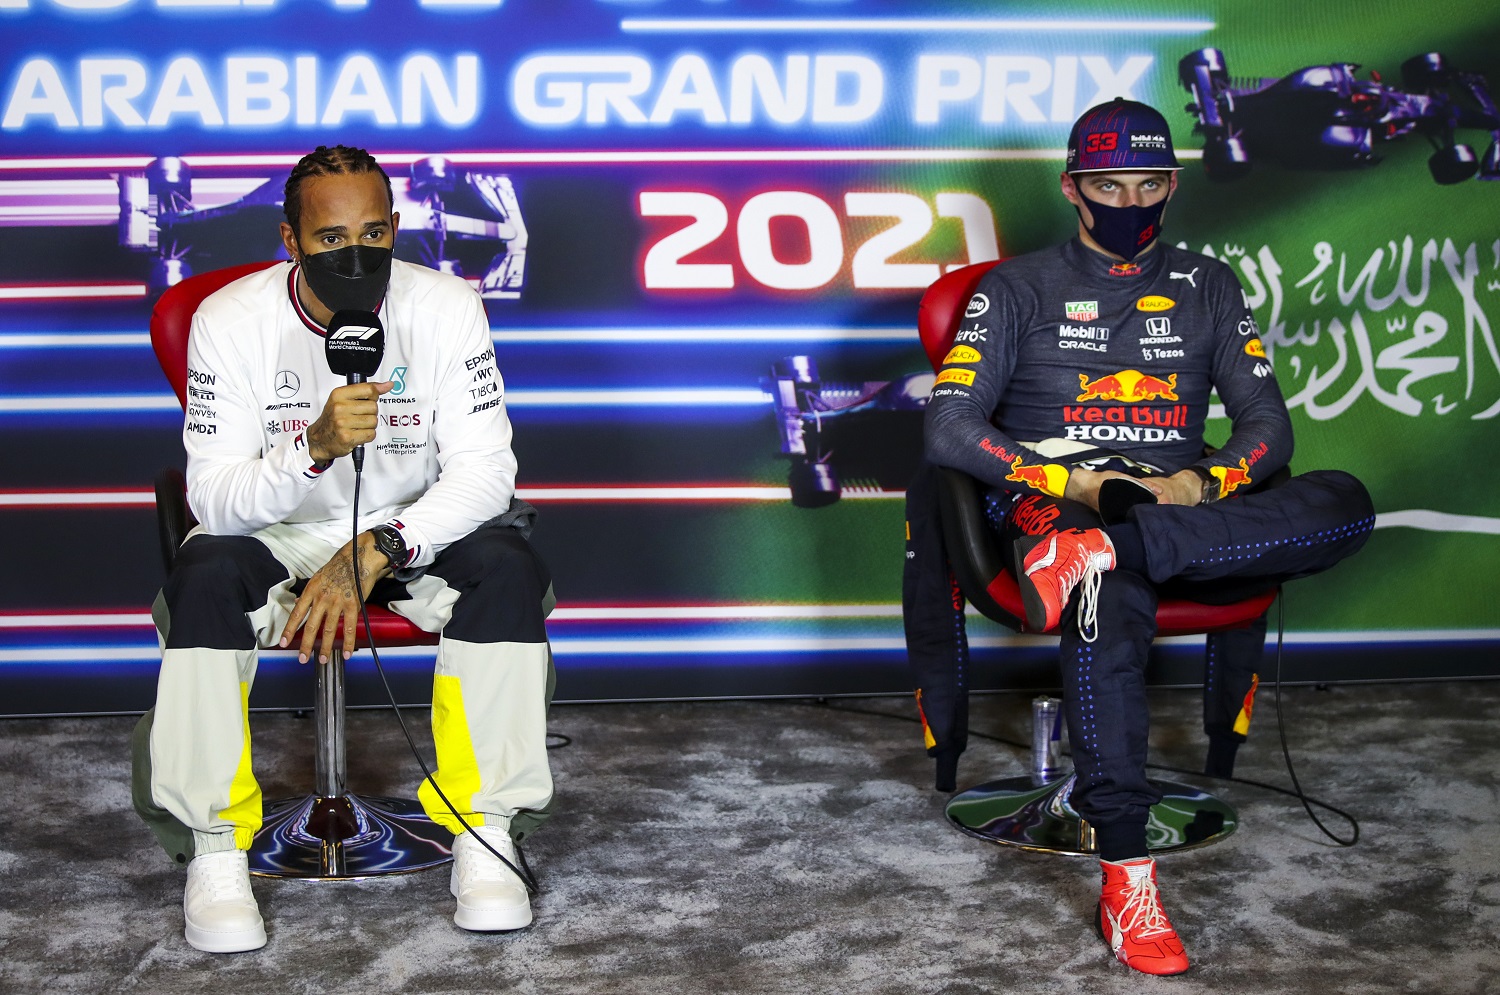 Lewis Hamilton of Mercedes GP and Max Verstappen of Red Bull Racing talk in the press conference after qualifying for the Formula 1 Grand Prix of Saudi Arabia at Jeddah Corniche Circuit on Dec. 4, 2021.